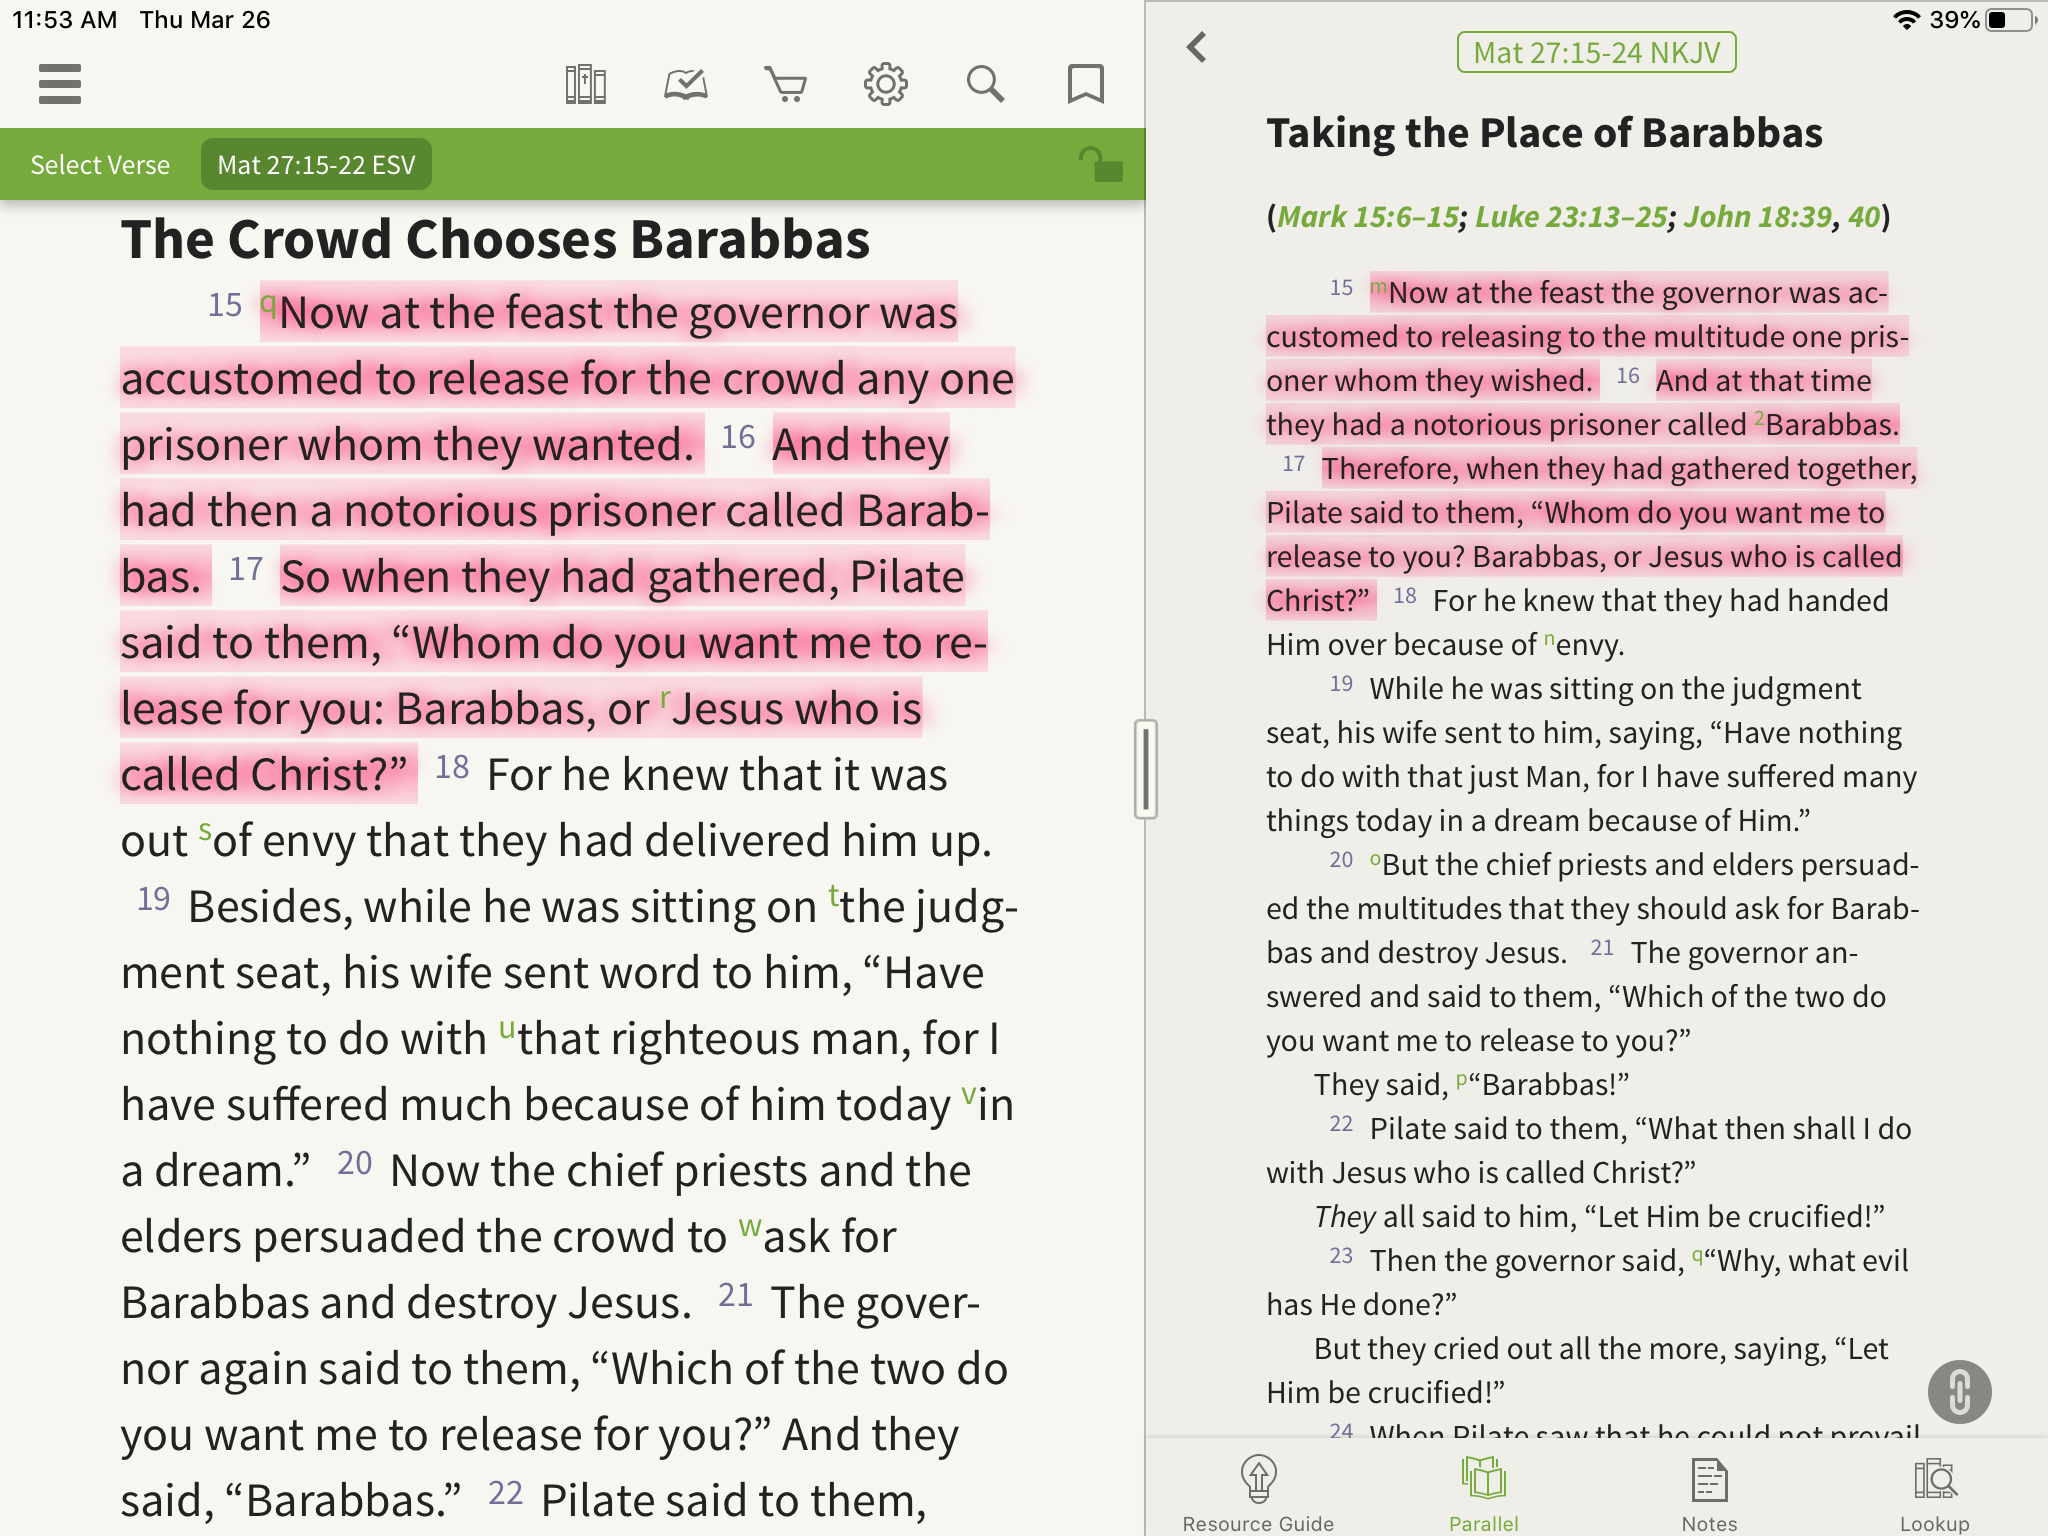 Olive Tree Bible App with Parallel Bible open